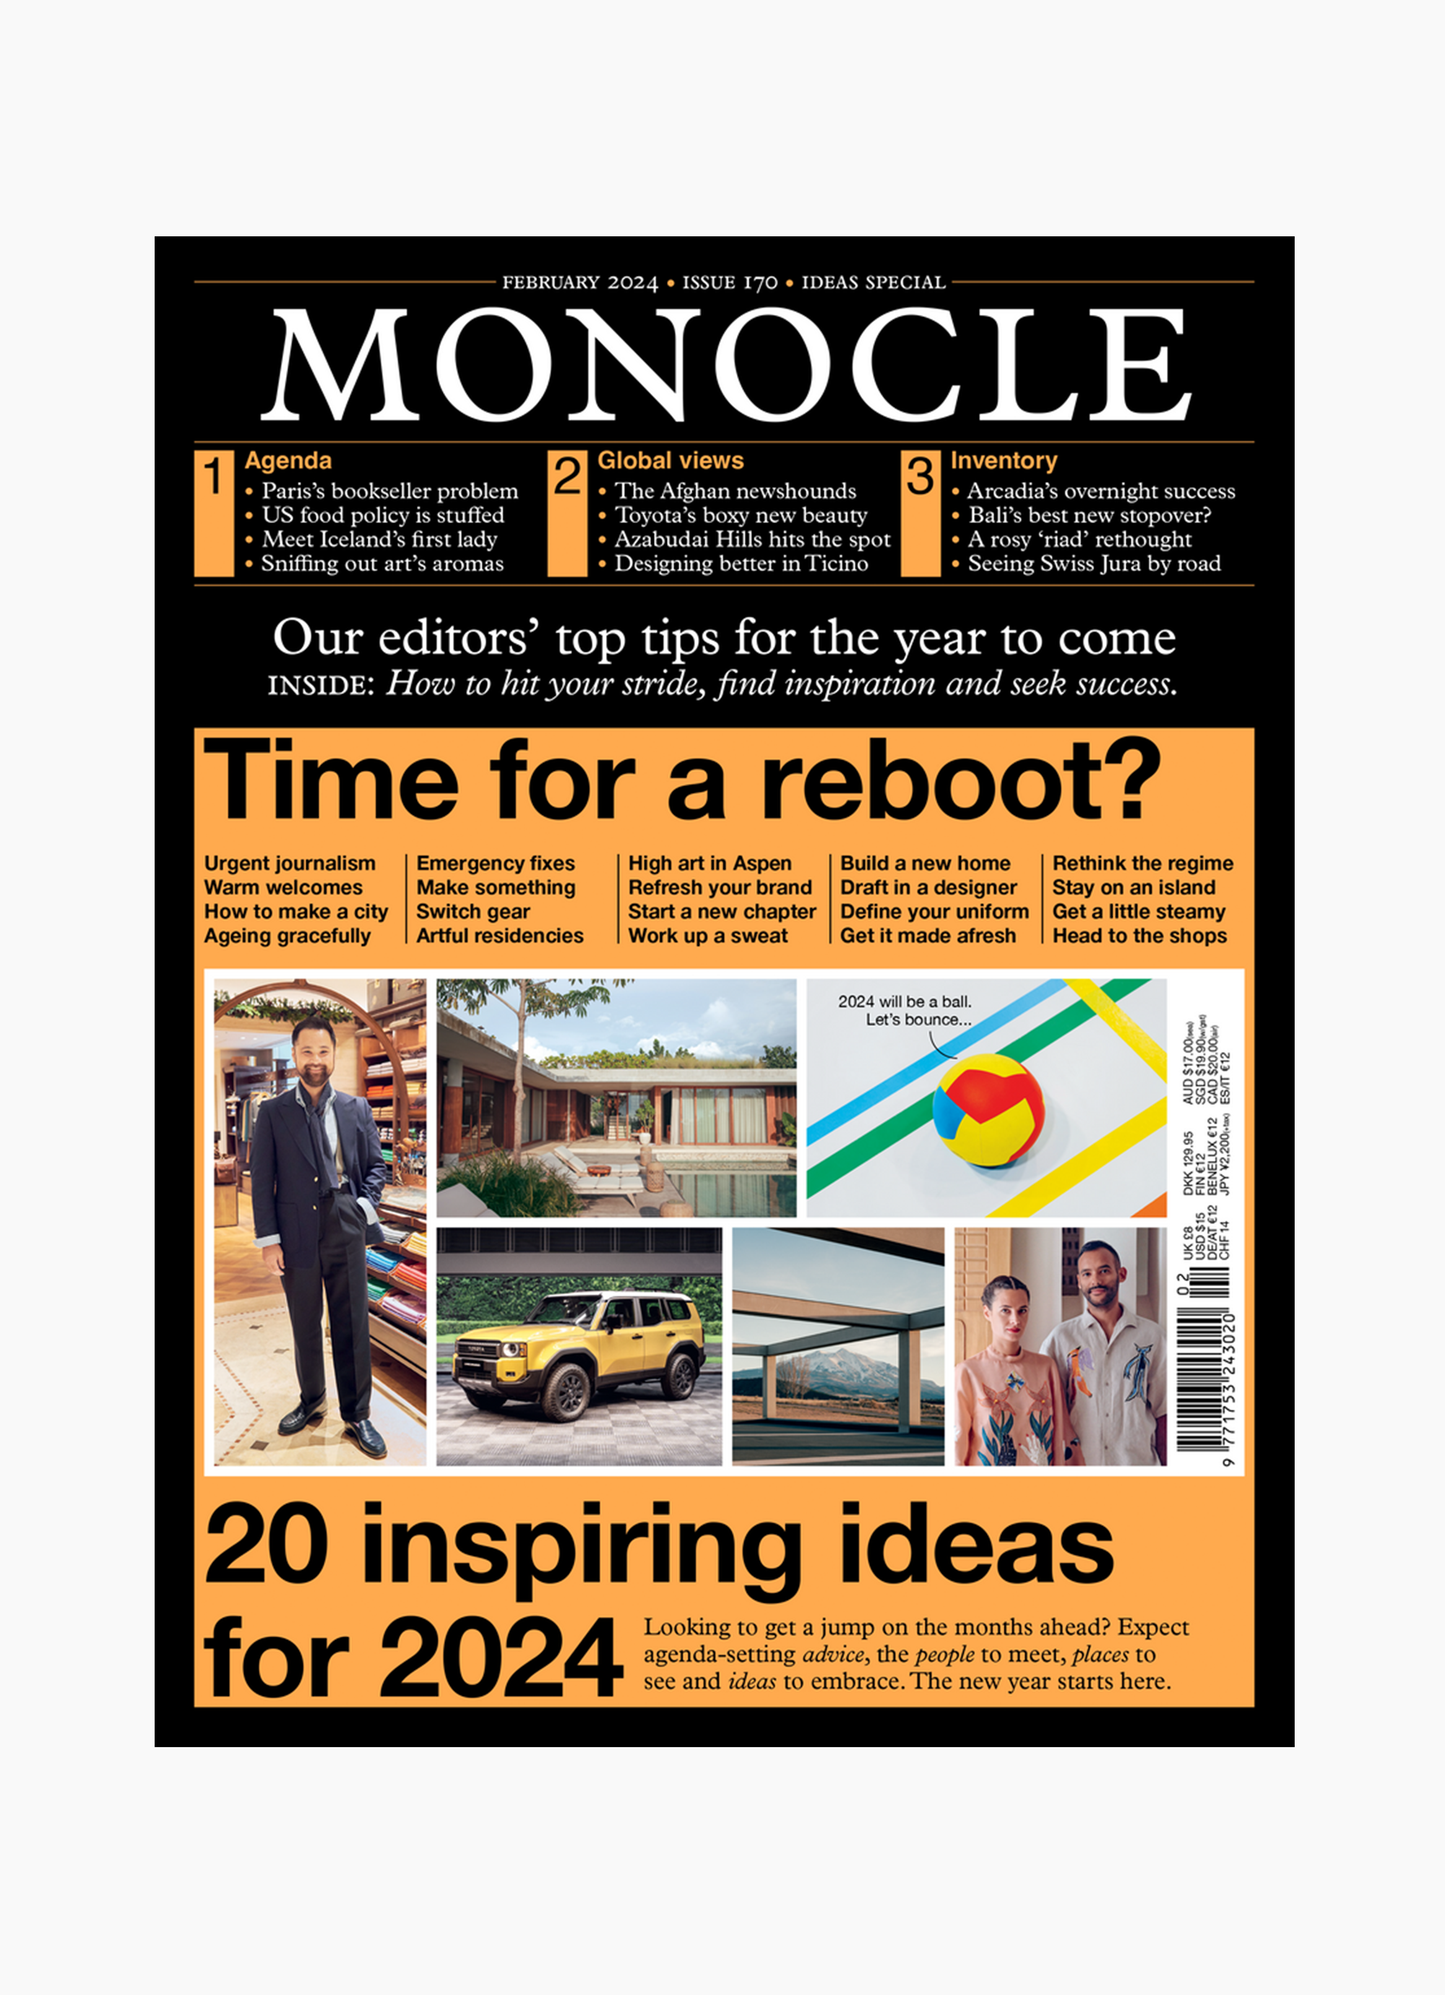 Monocle, Issue 170